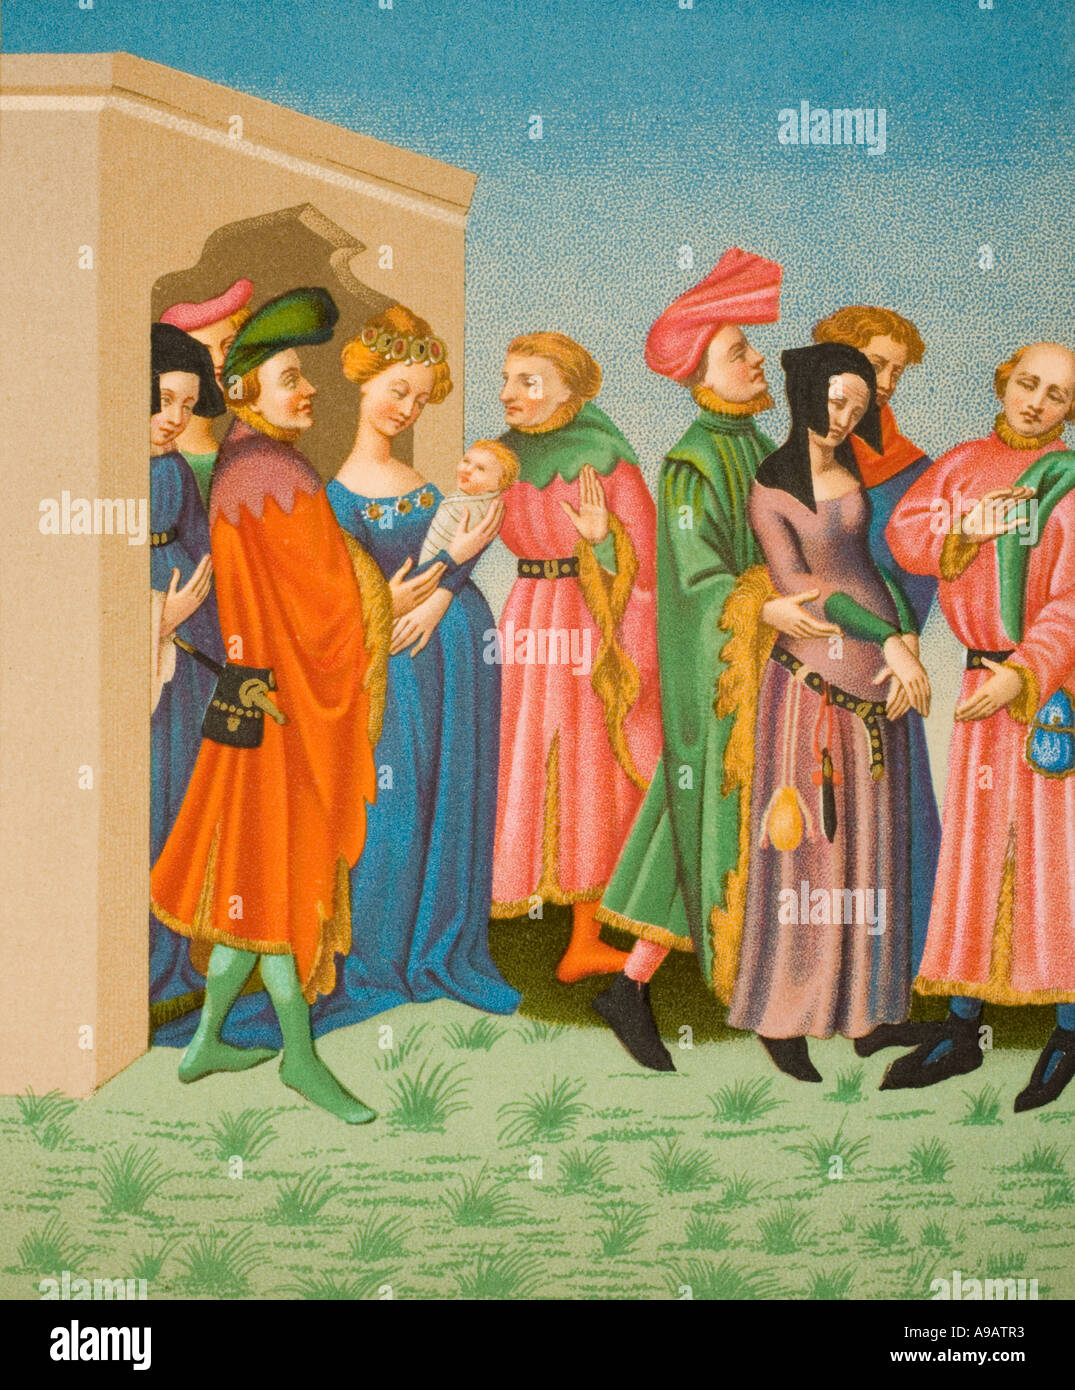 A young mother's retinue. Parisian costumes at the end of the 14th century. Stock Photo